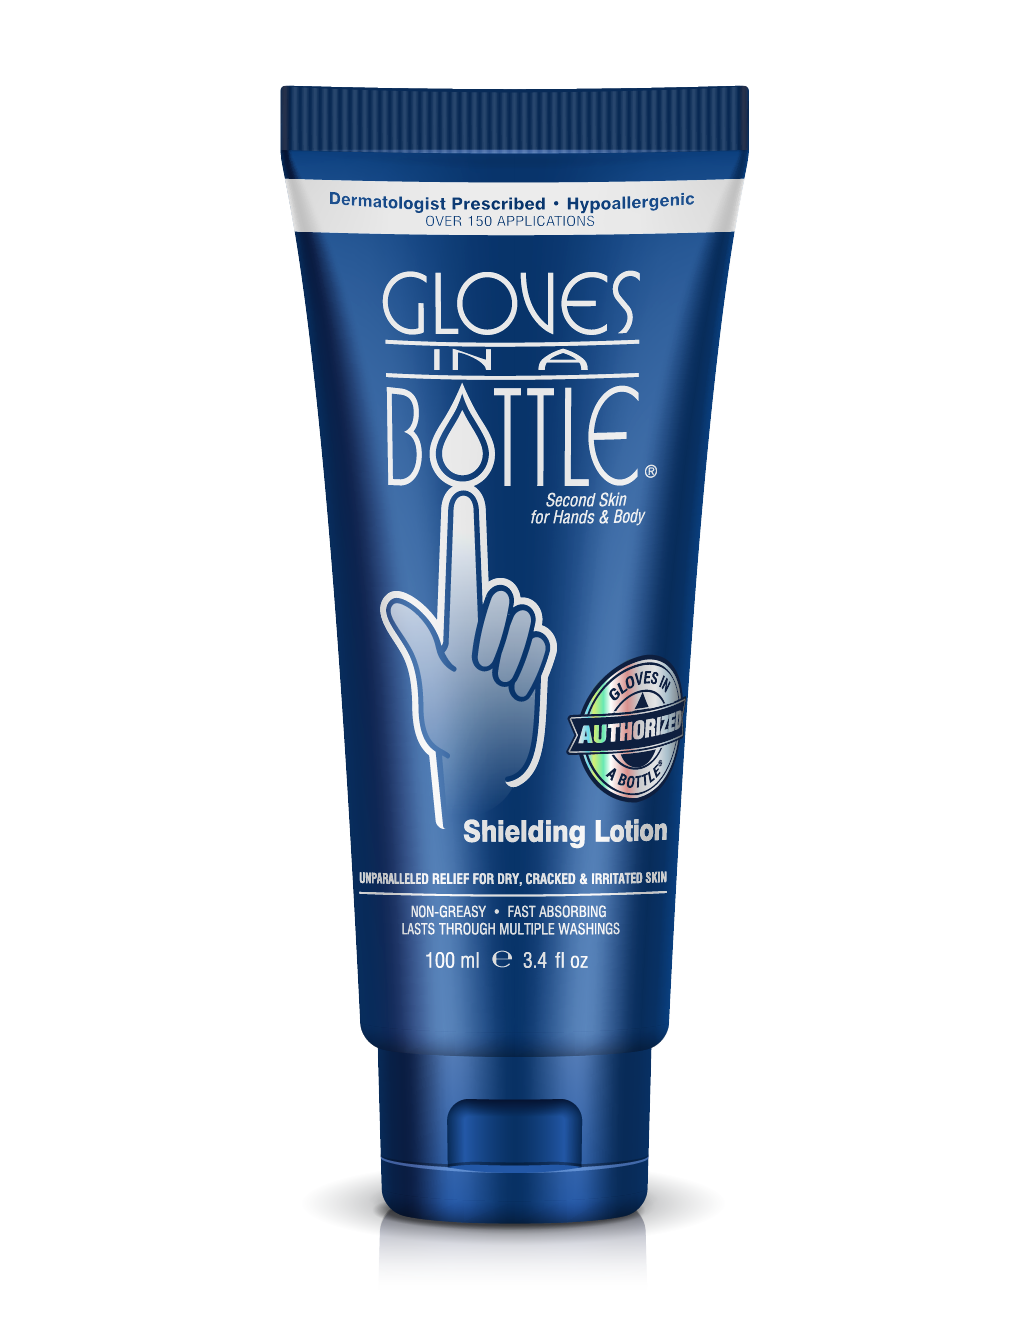 Skin clipart hand lotion. Gloves in a bottle